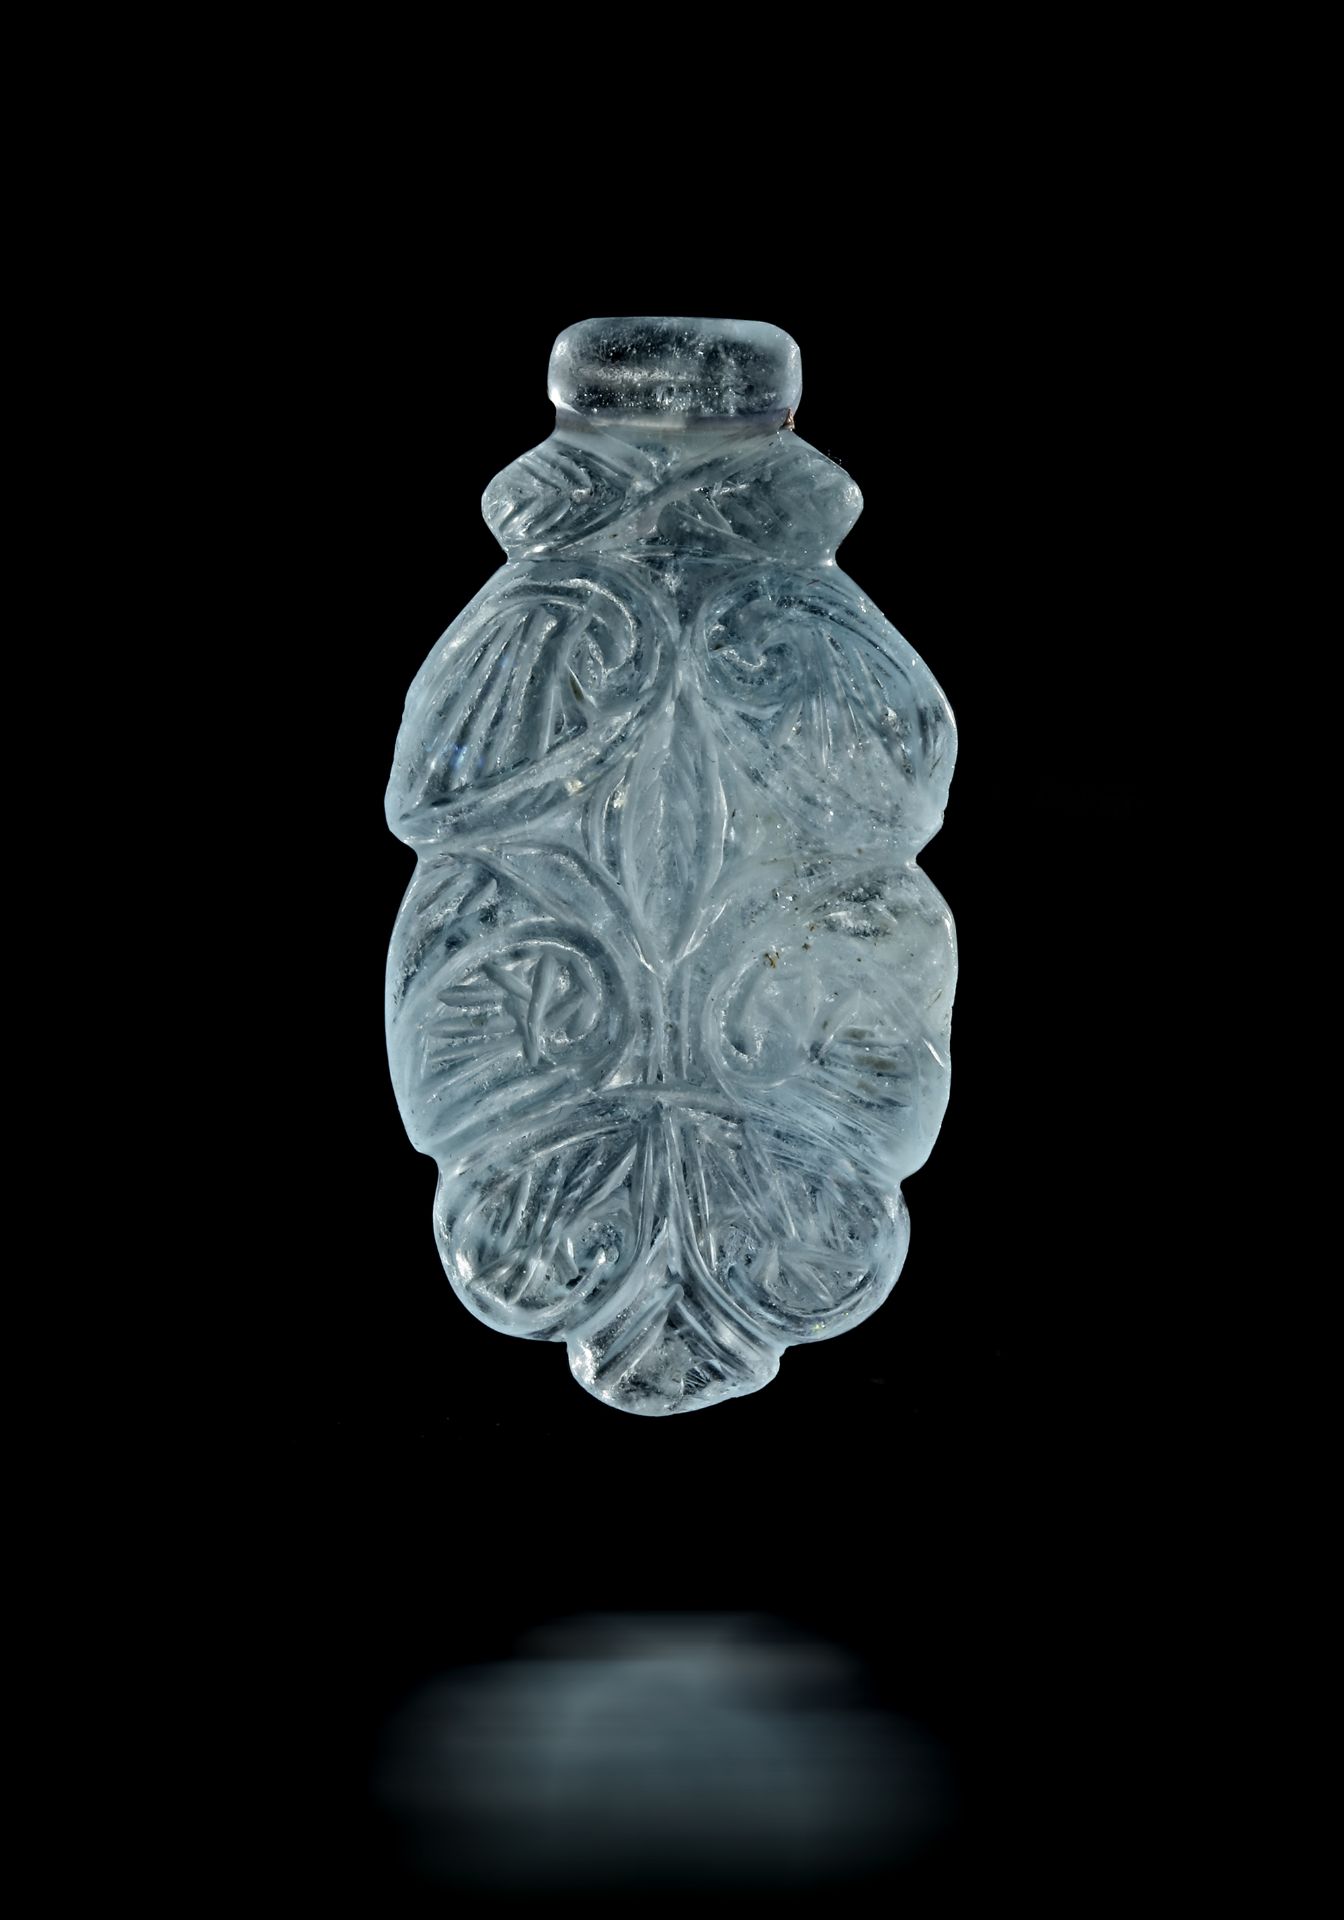 A FATIMID CRYSTAL CARVED PENDANT, EGYPT, 12TH CENTURY